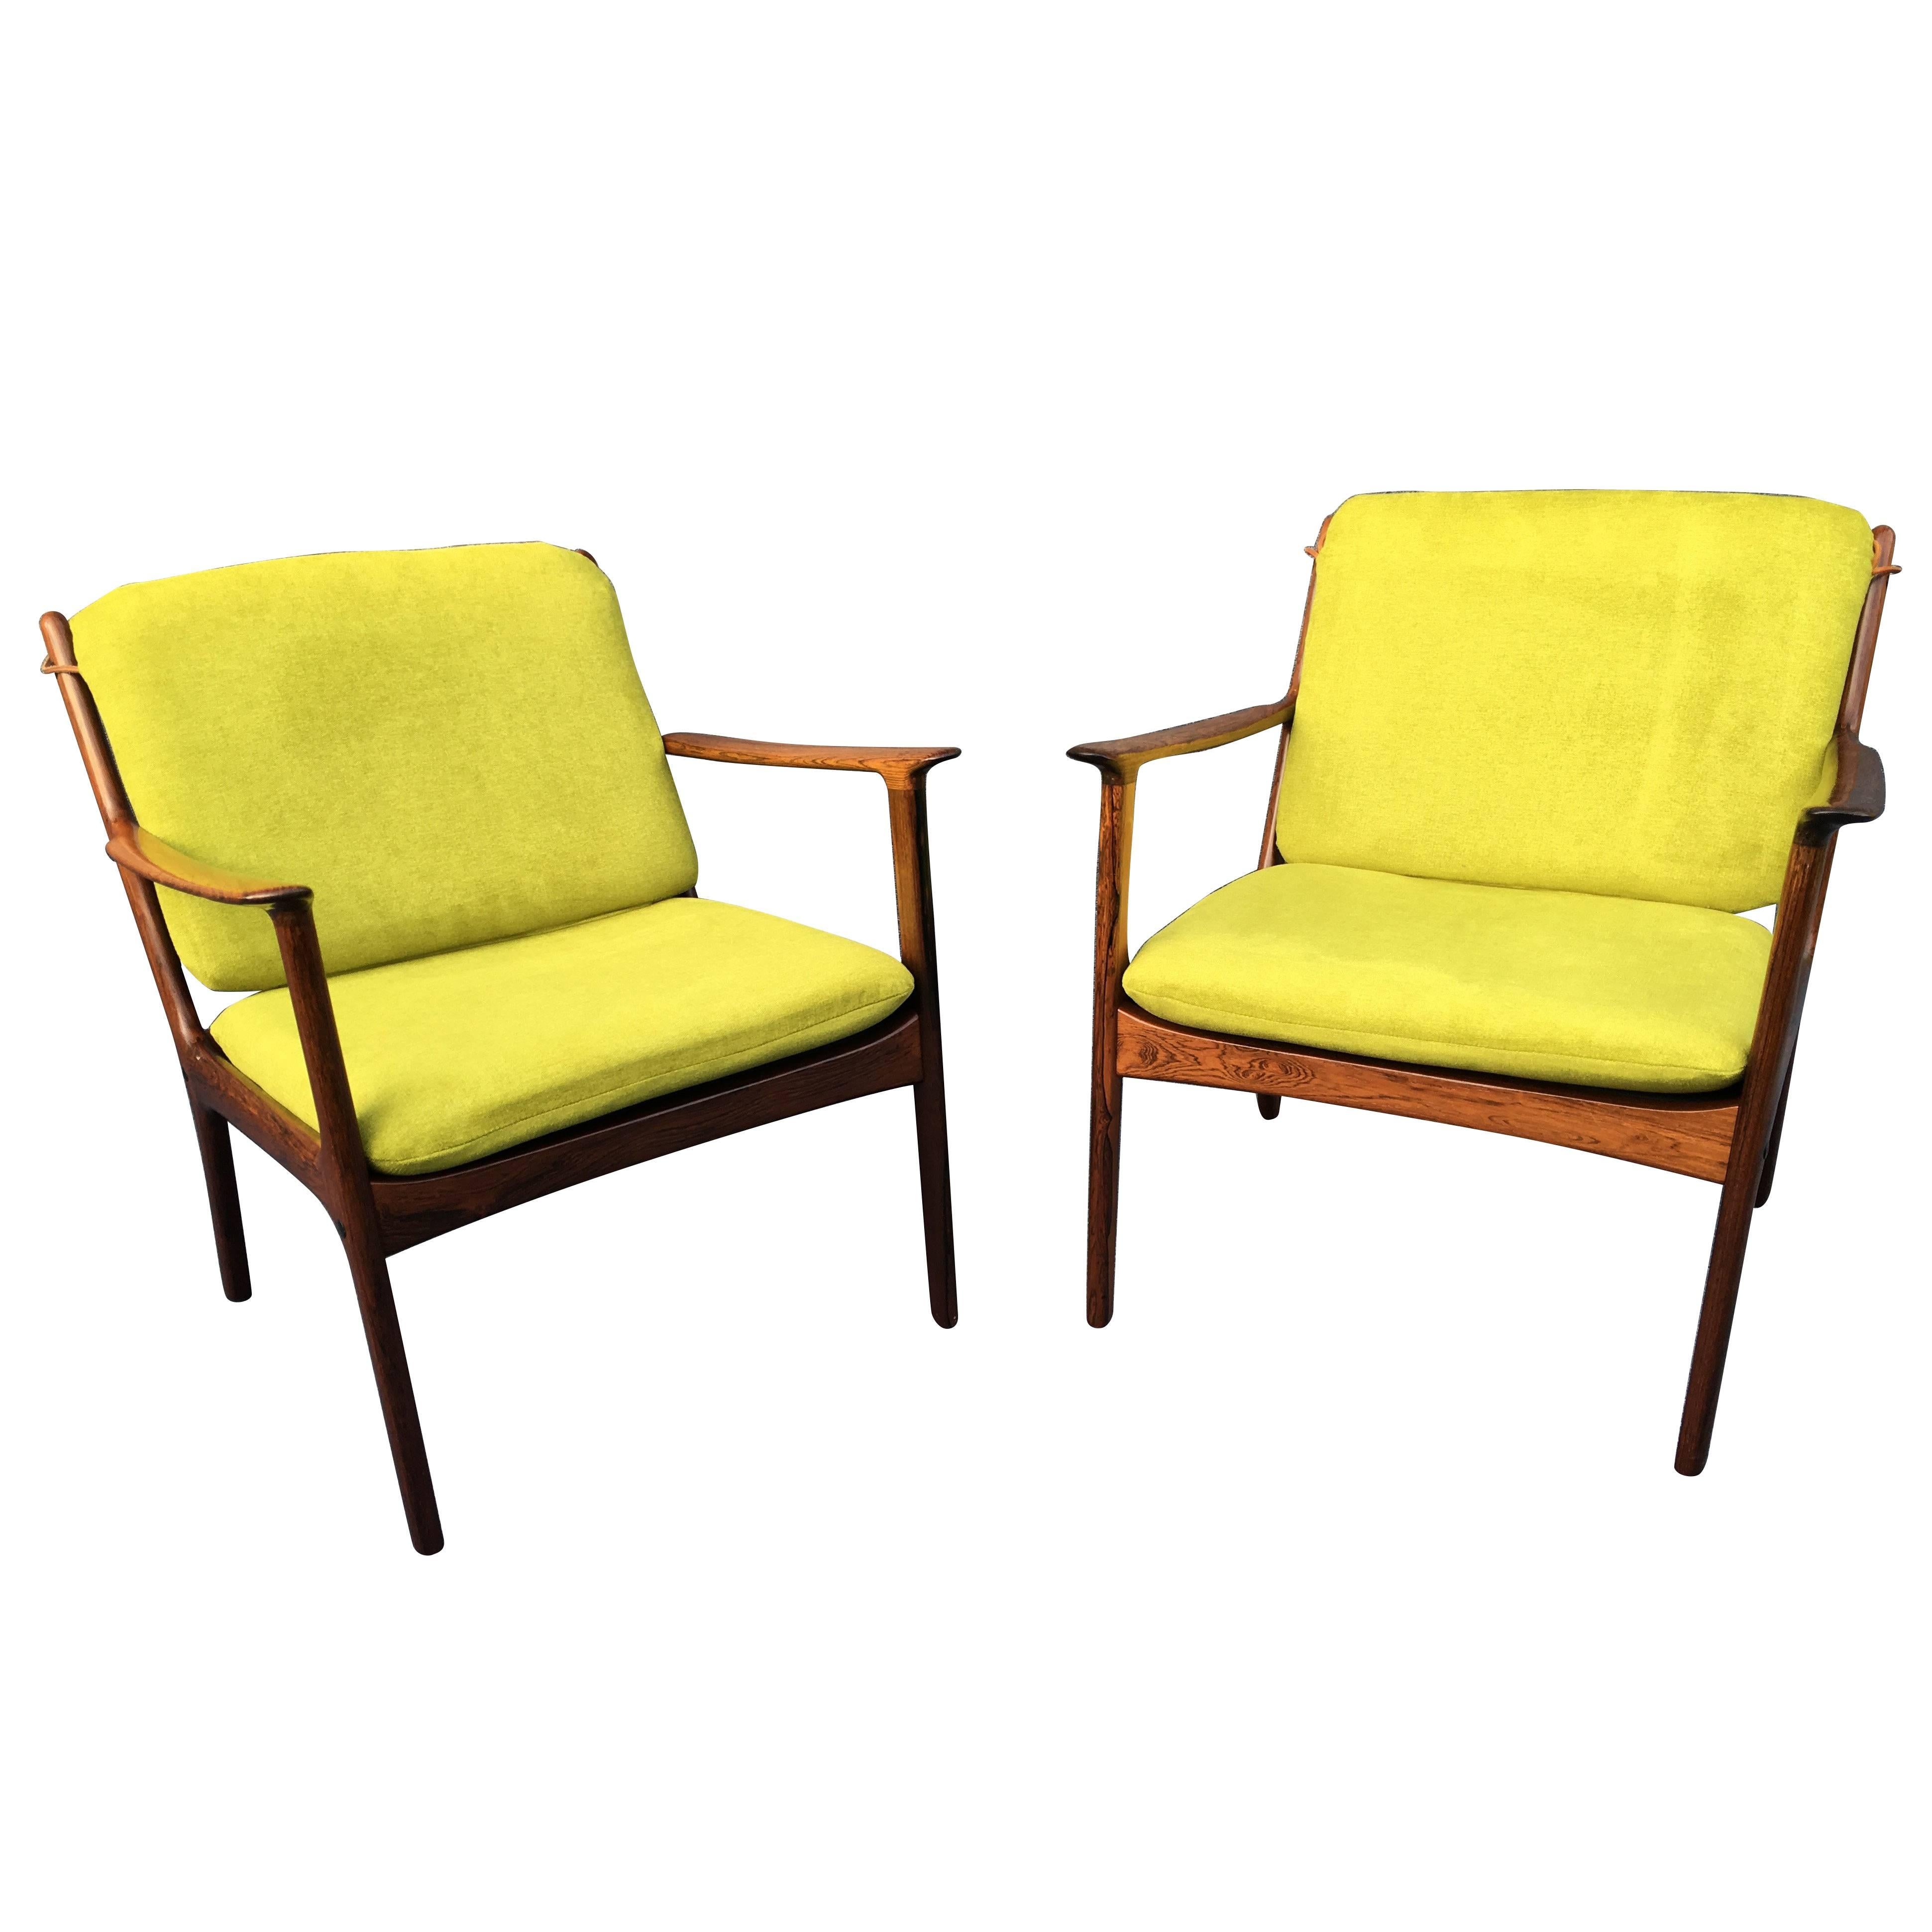 Pair of Danish Rosewood 'PJ112' Armchairs by Ole Wanscher for Poul Jeppersen